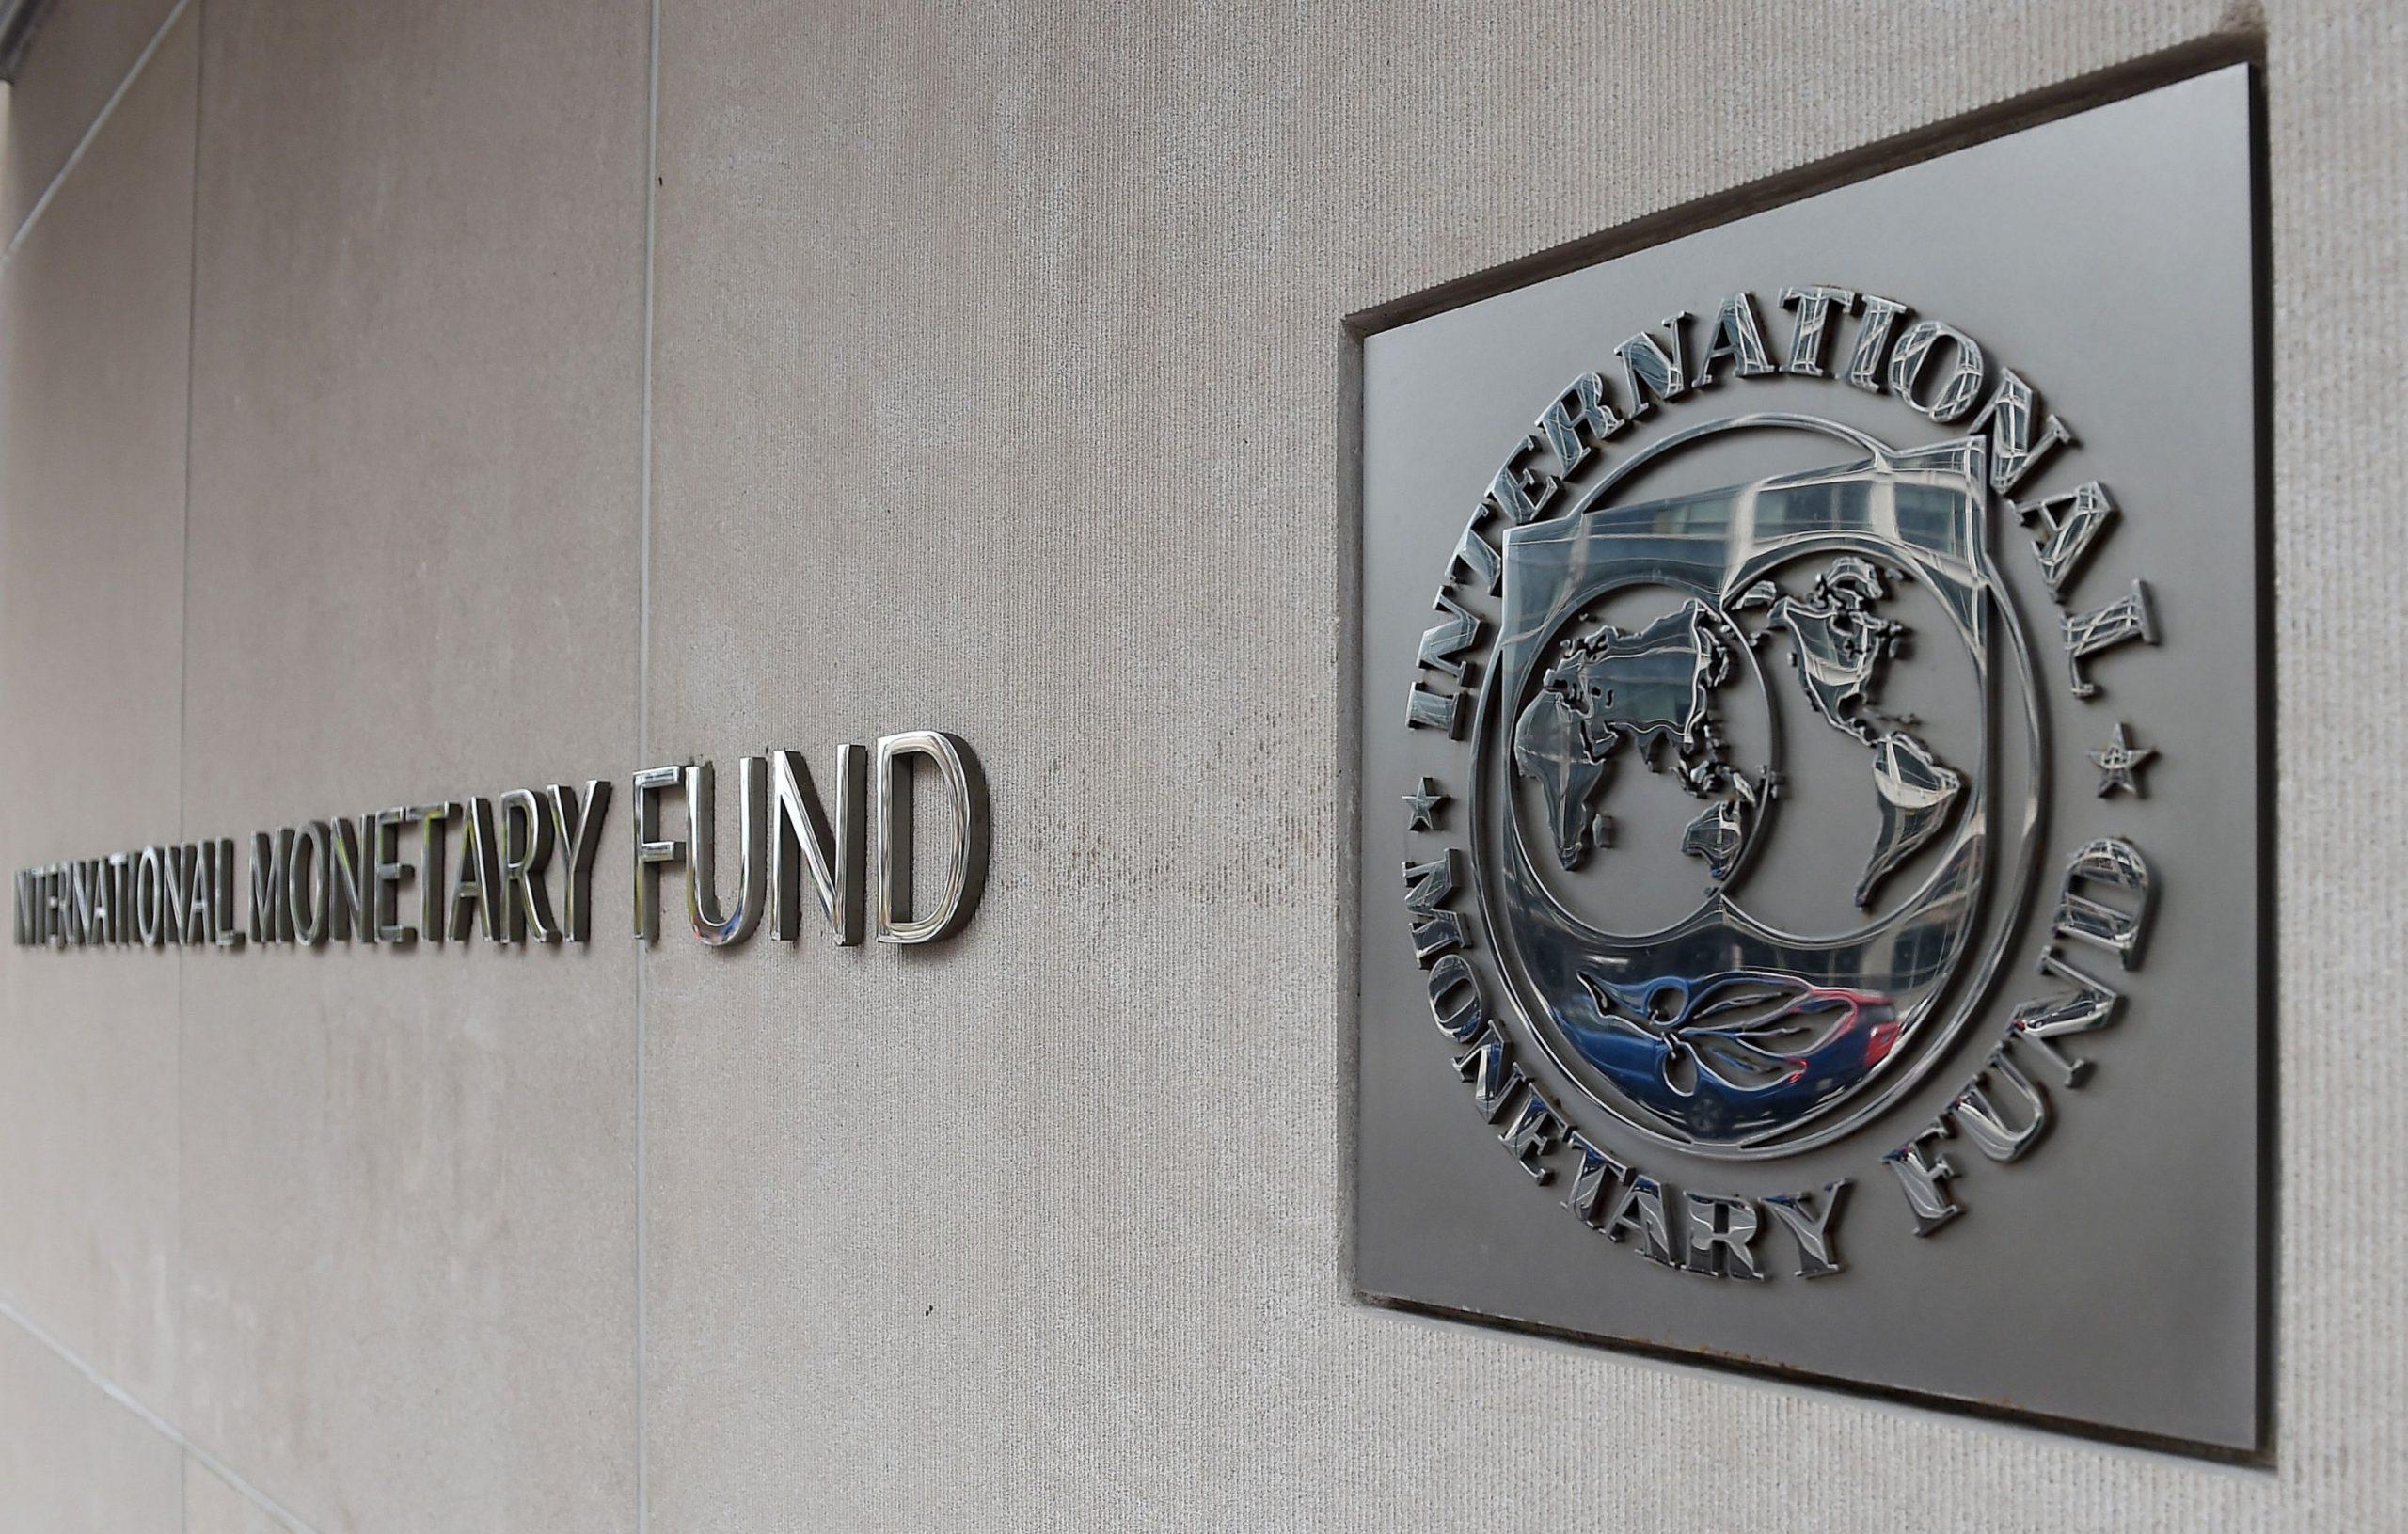 30 years of cooperation with the International Monetary Fund